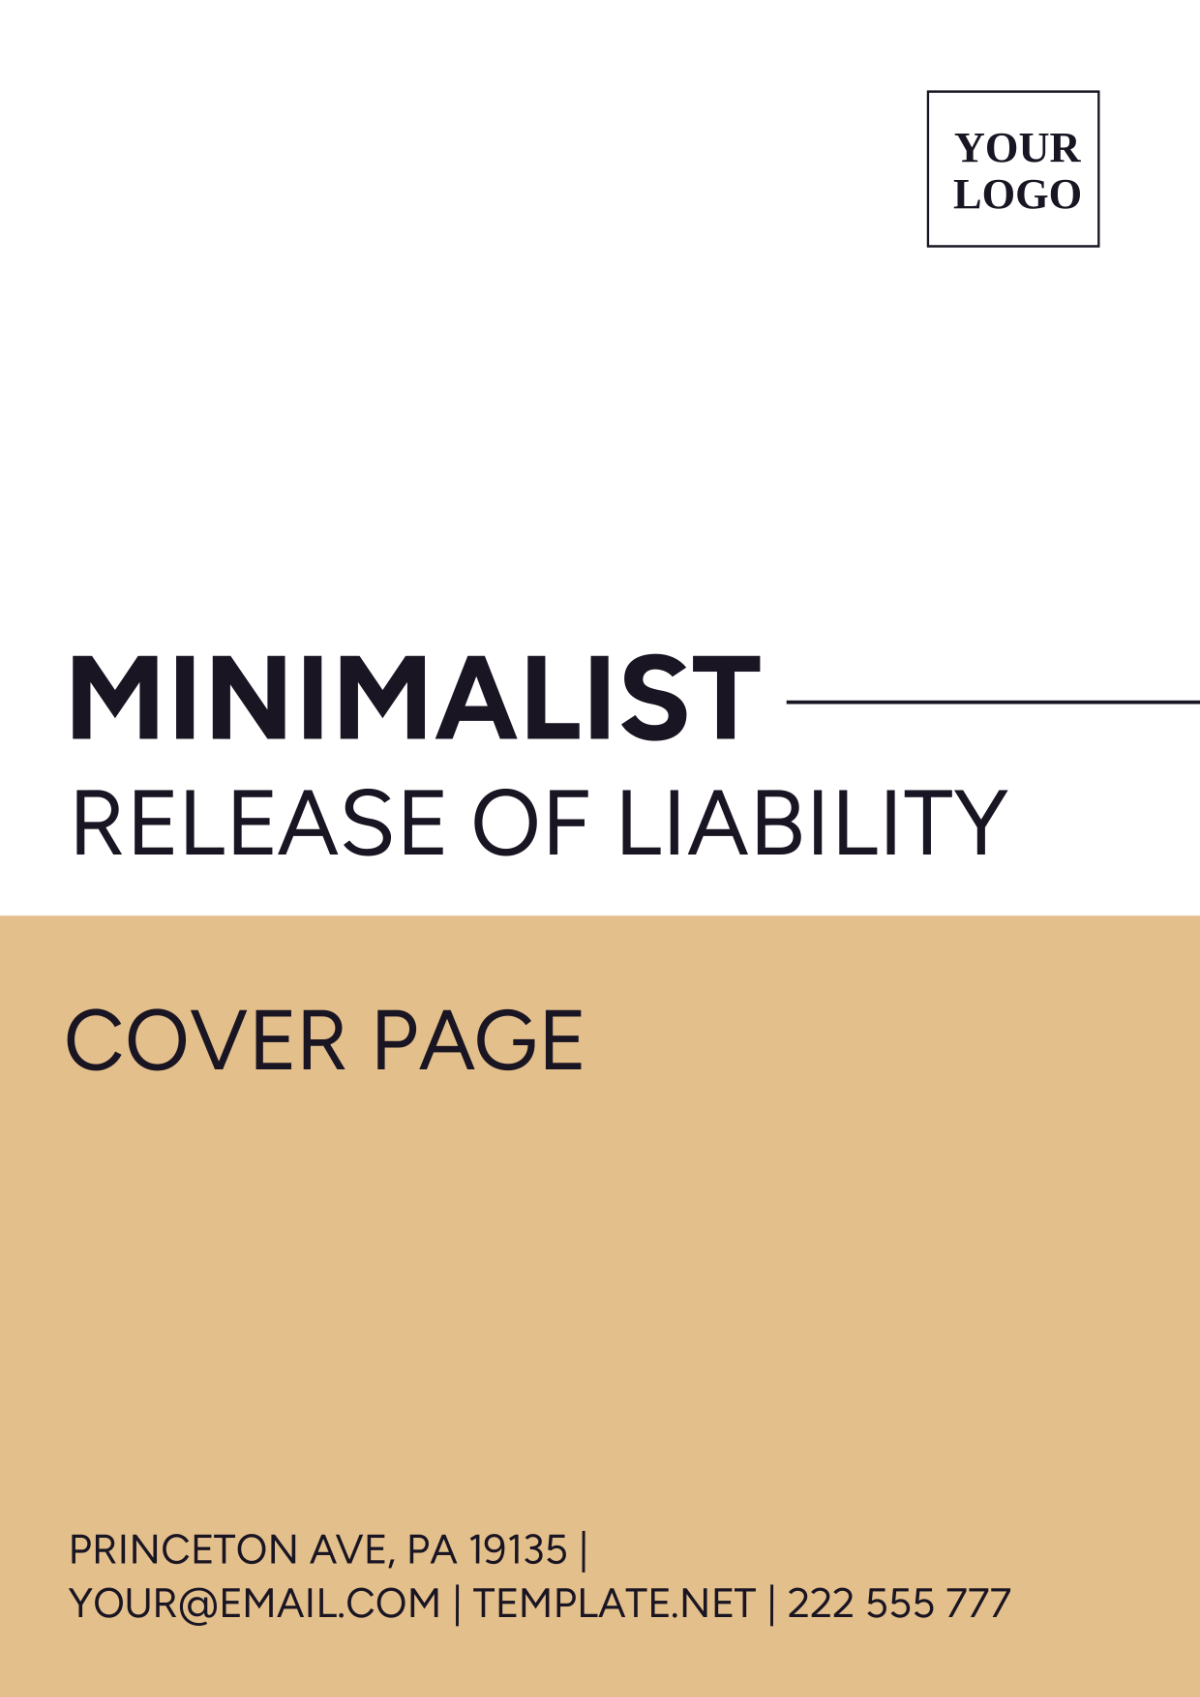 Minimalist Release of Liability Cover Page